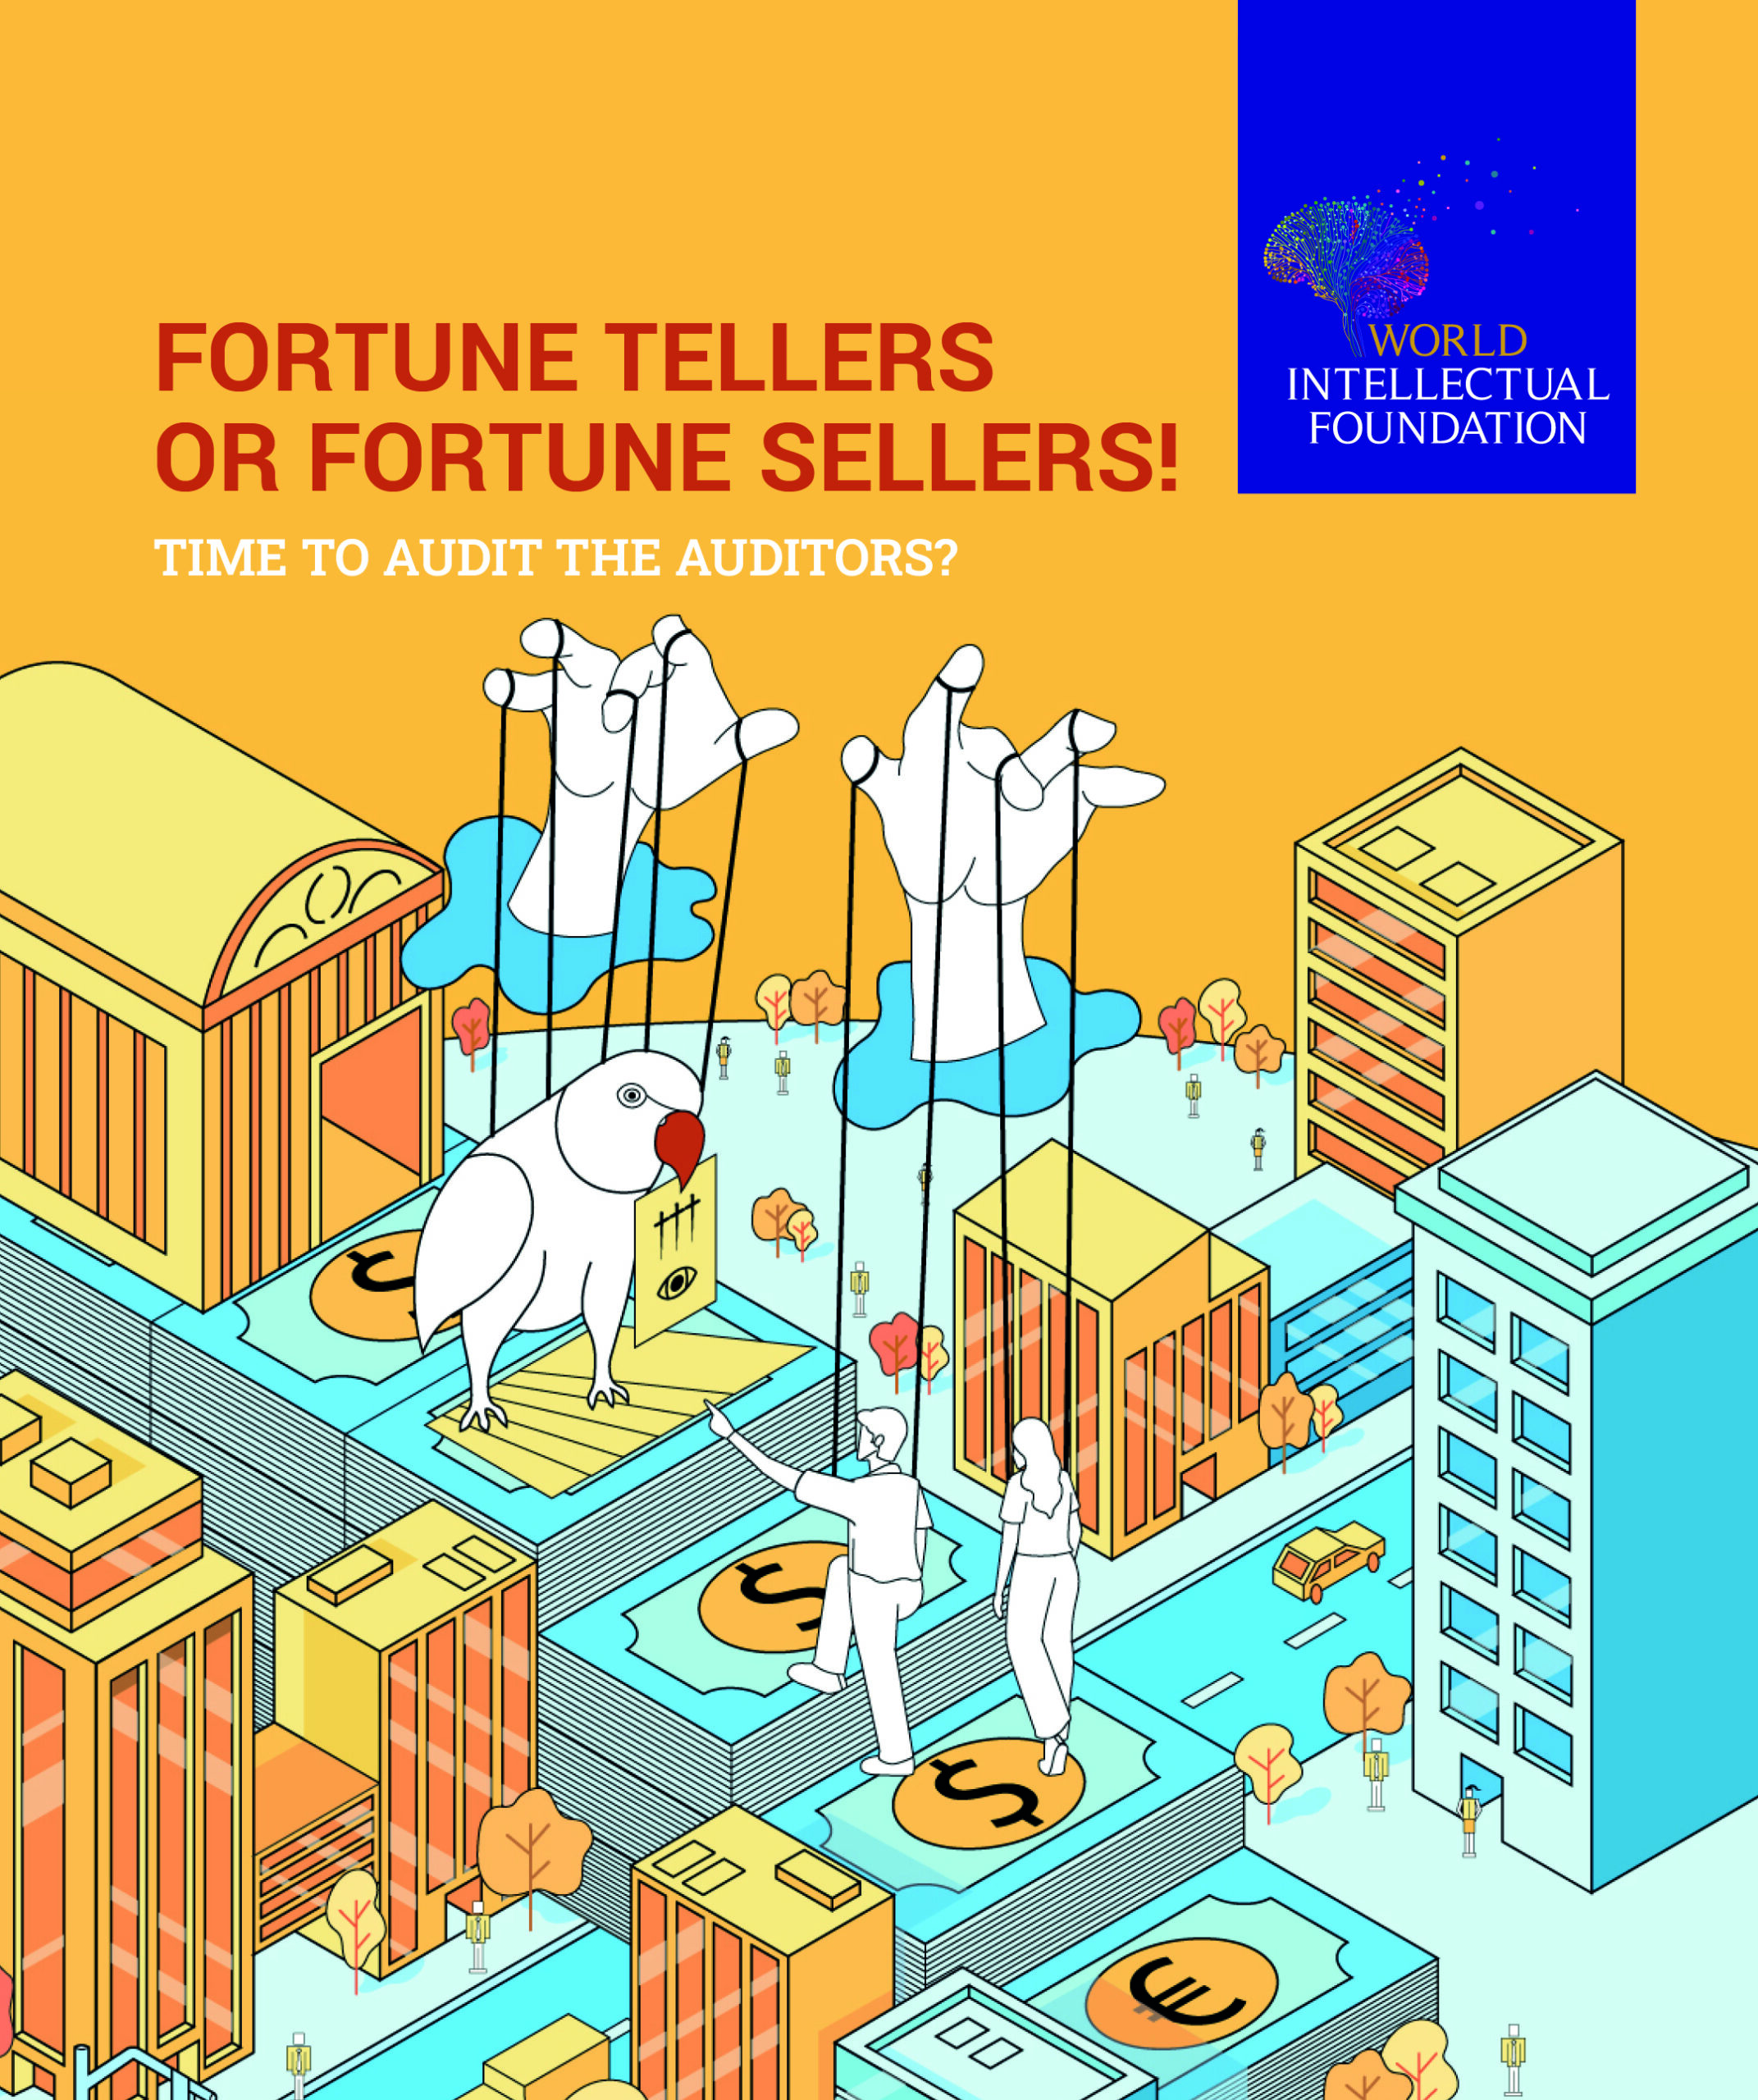 Fortune Tellers Or Fortune Sellers! Time to Audit the Auditors?